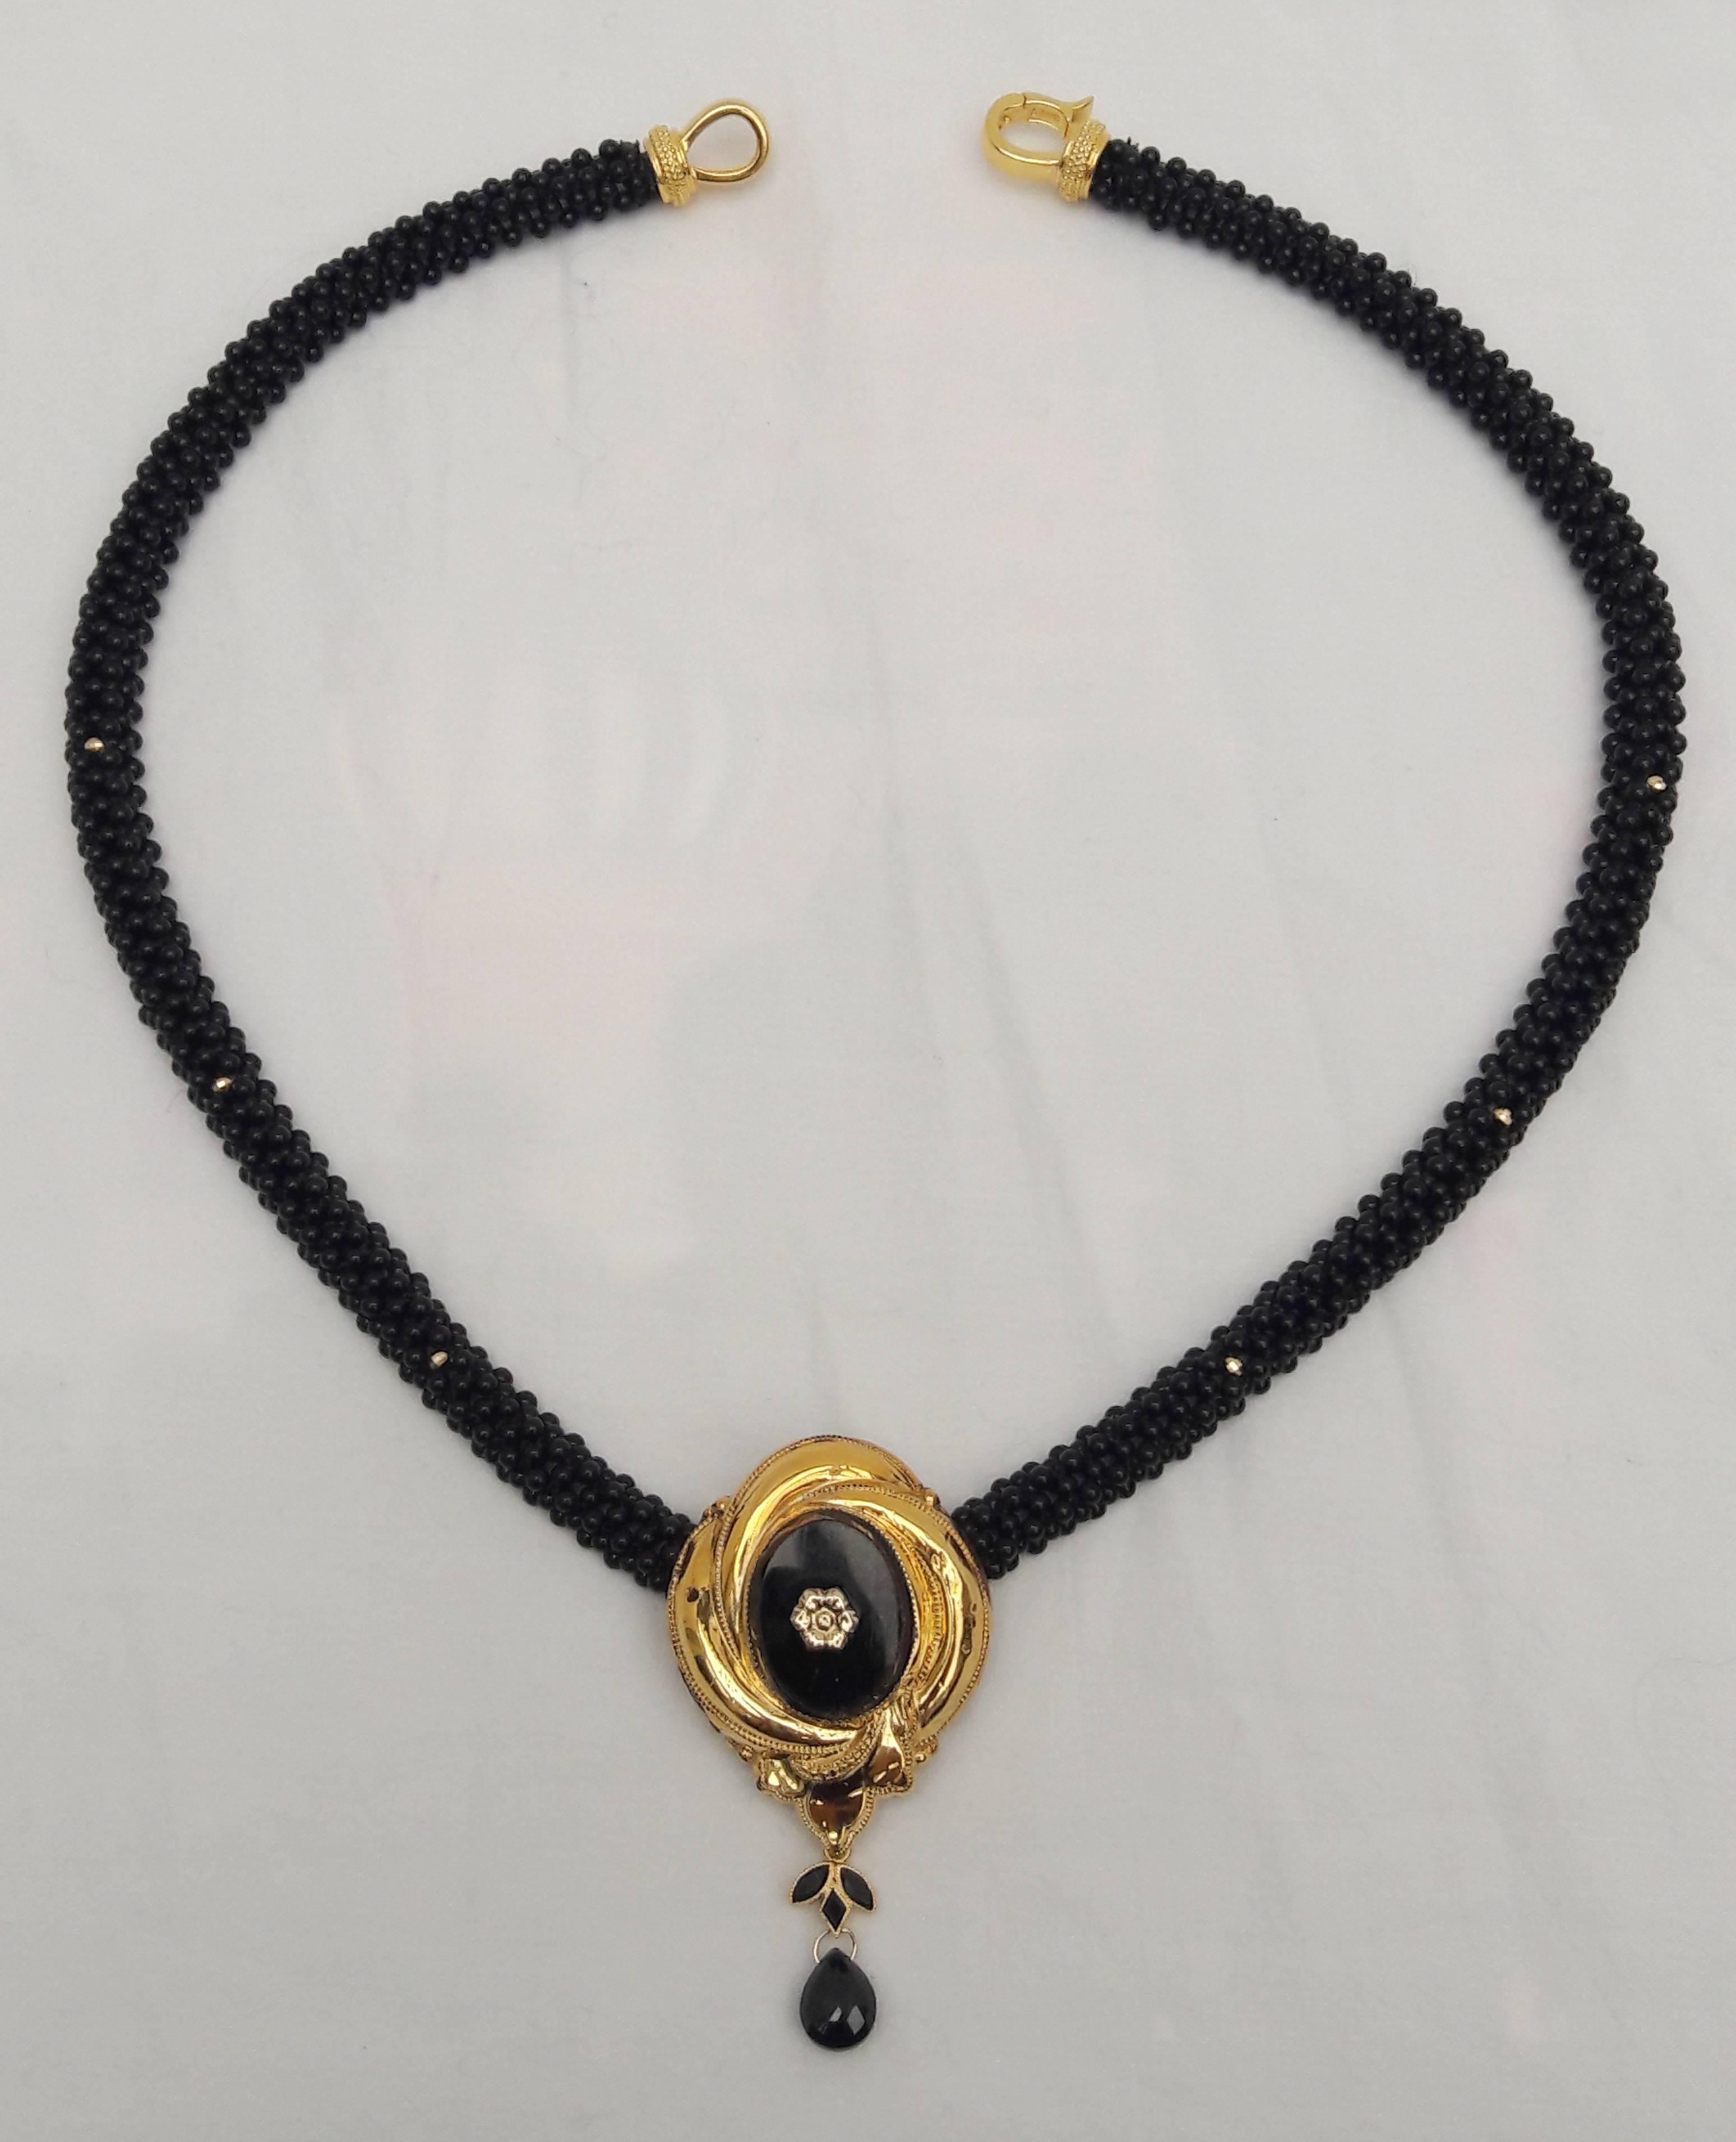 A unique and one-of-a-kind statement.

Made with hundreds of carefully selected, smooth and round Black Onyx beads and woven into a tight, three dimensional rope. The intricate weaving pattern gives a very solid, dense feeling, while providing a